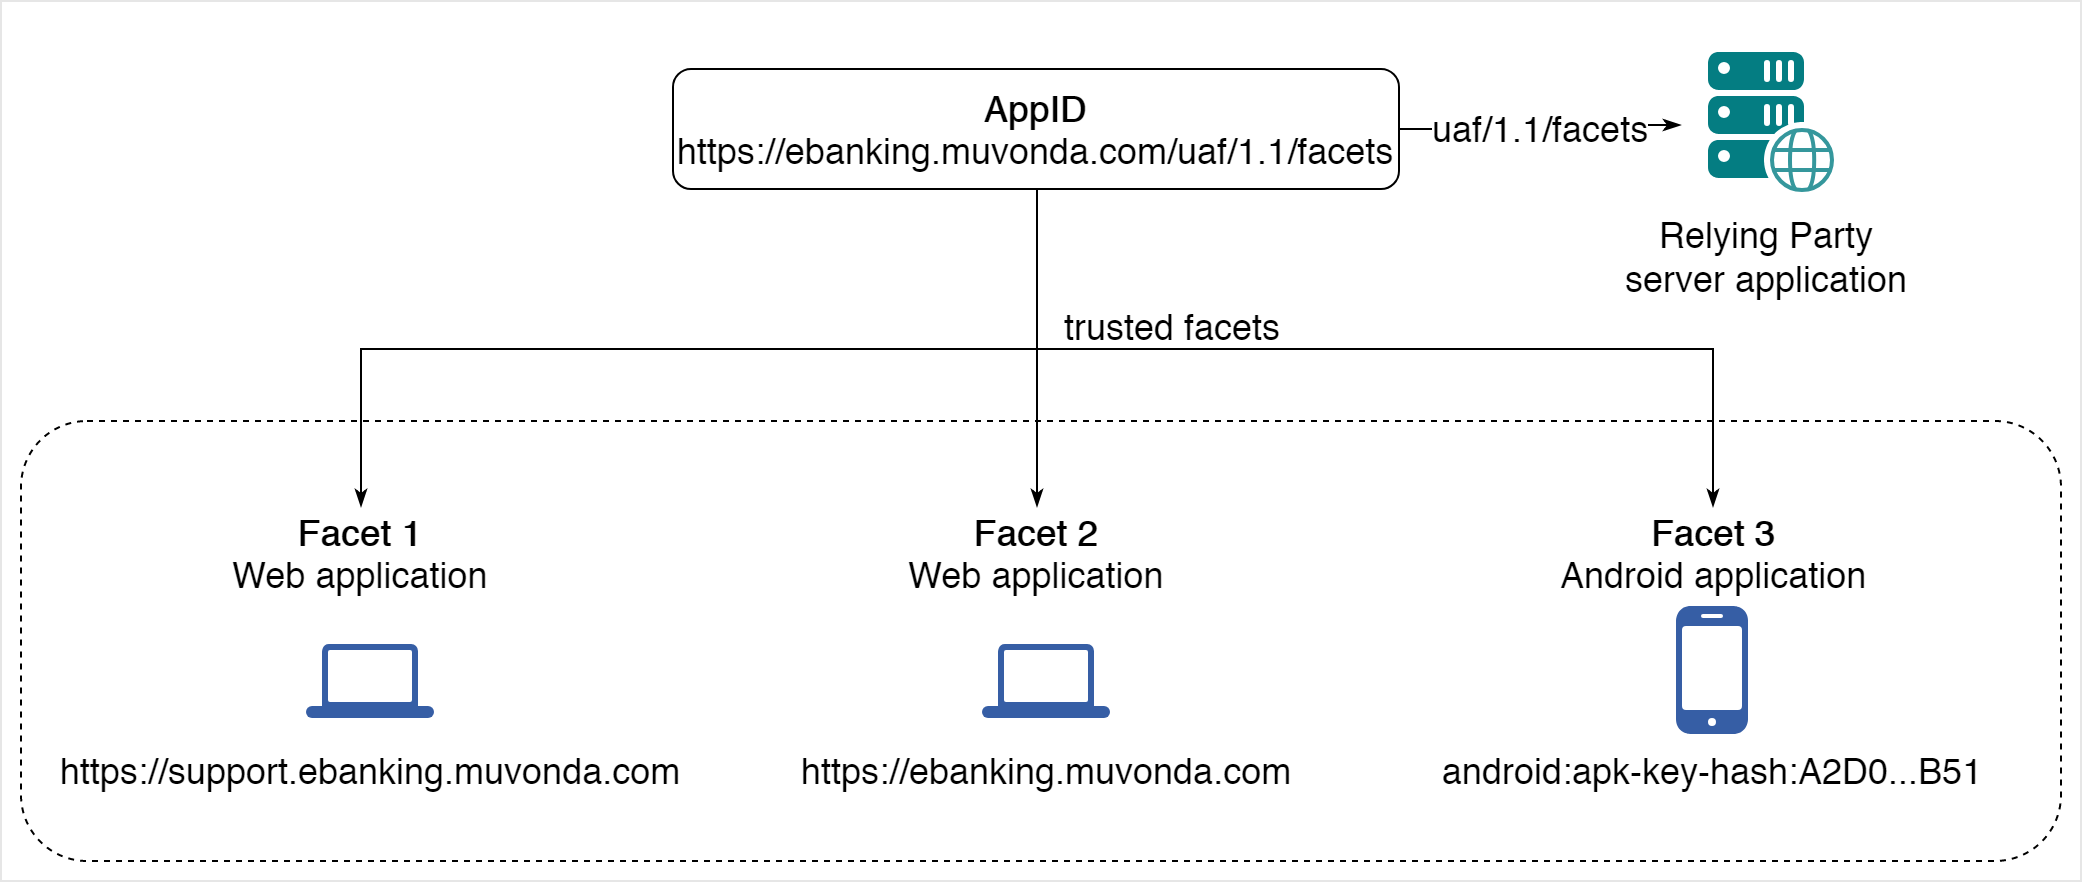 AppID and (trusted) Facets Relation